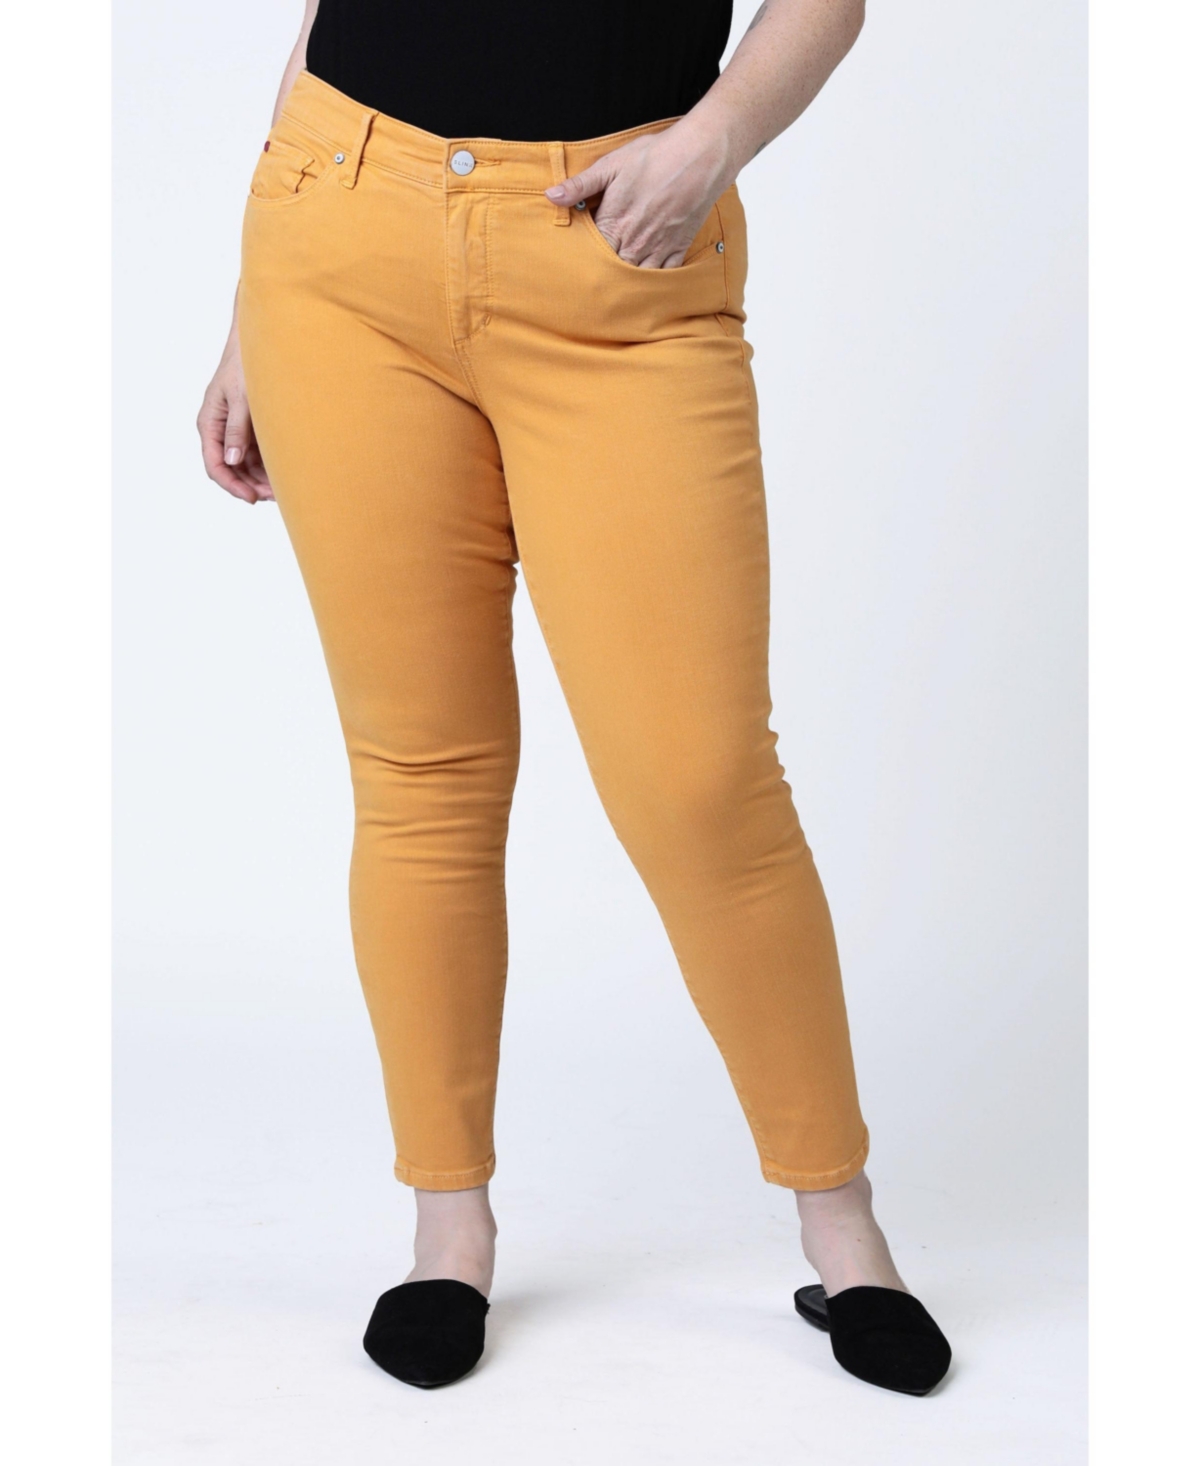 Plus Size Color Mid Rise Ankle Skinny pants - Clementine